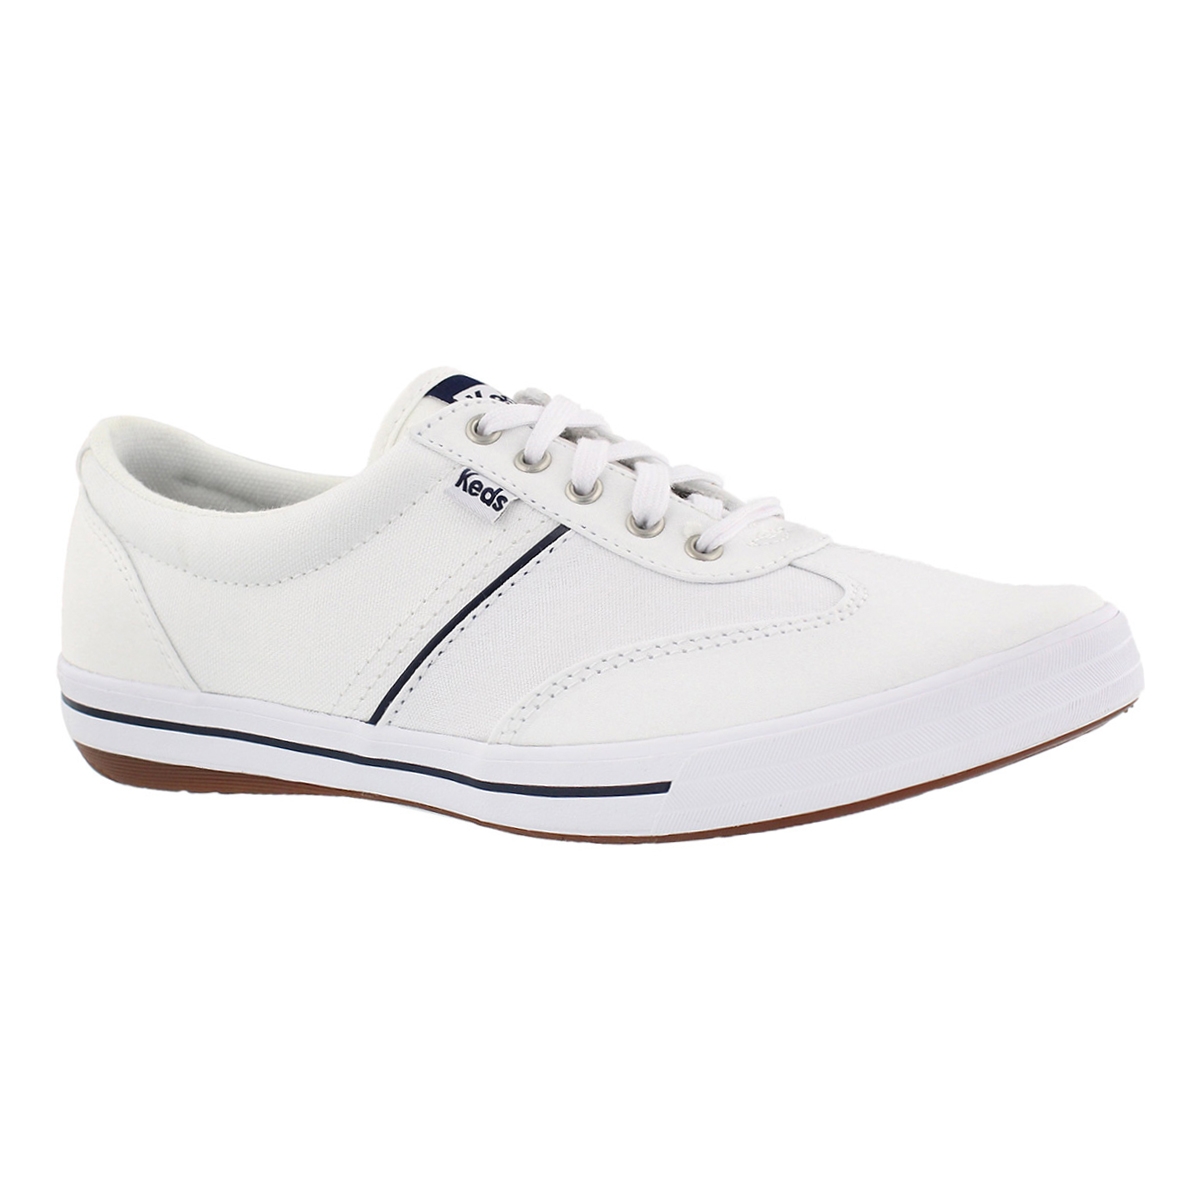 CRAZE II white lace up sneakers 